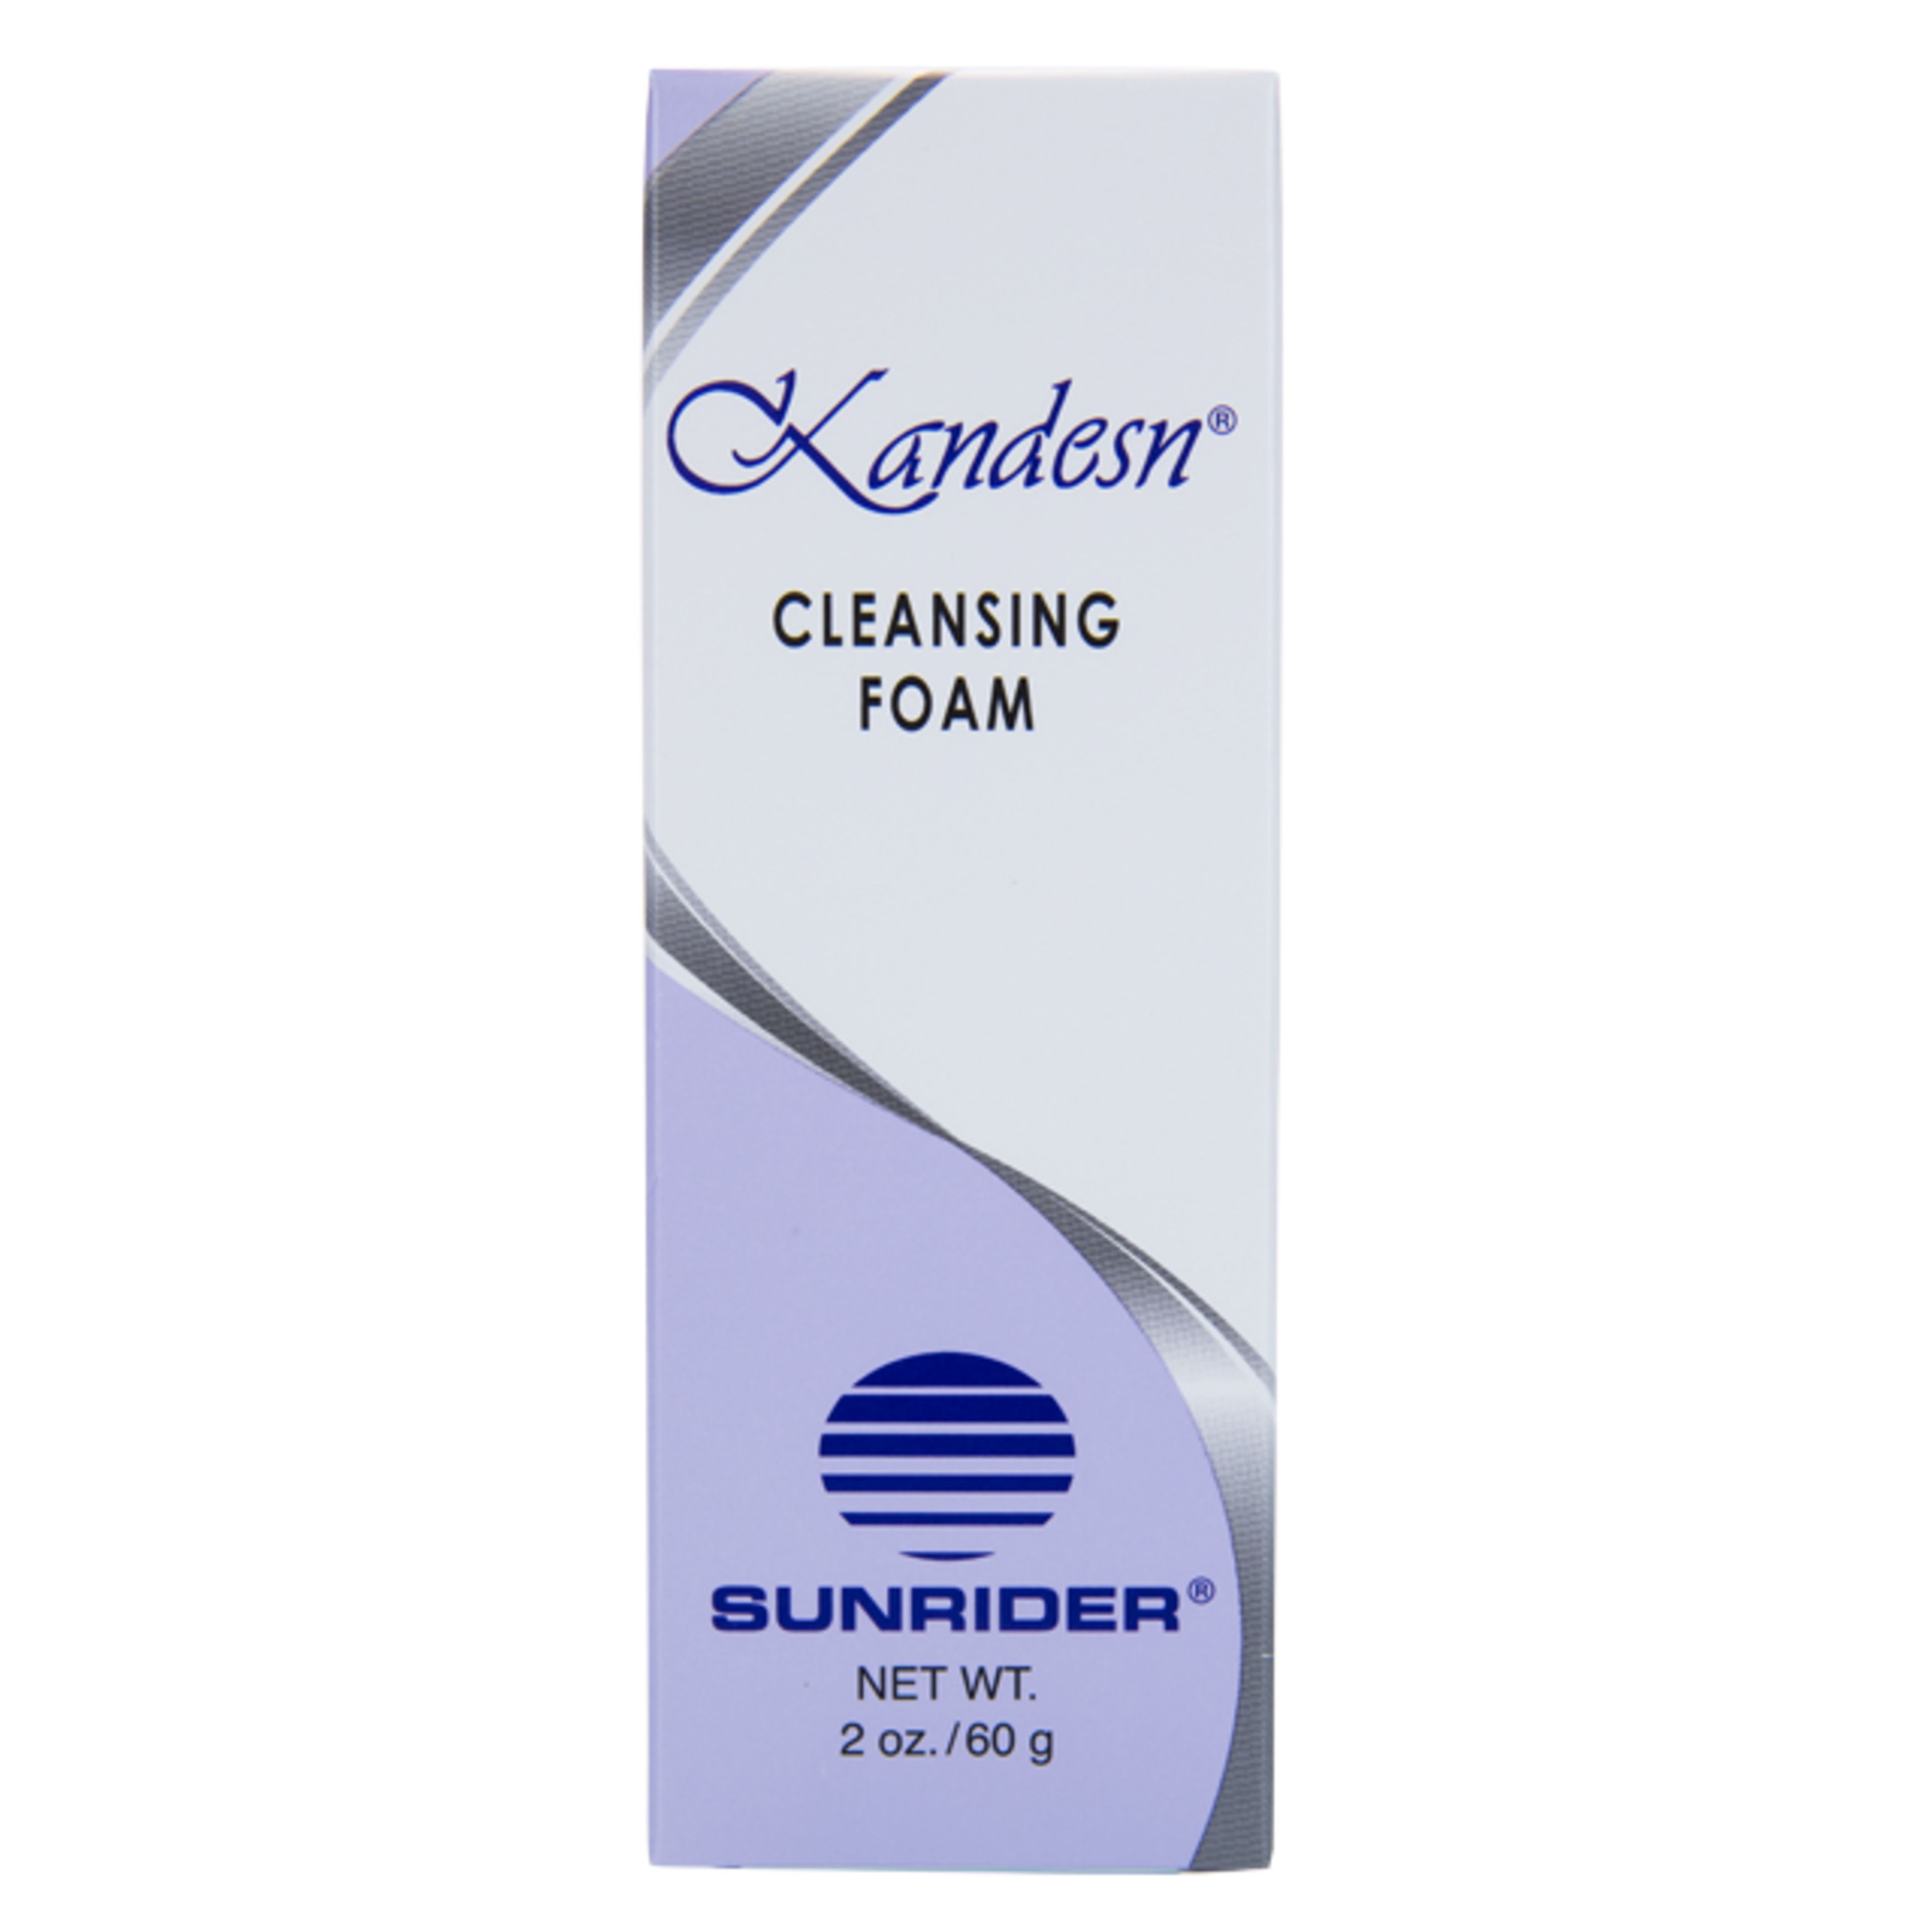 0123834-Kandesn-Cleansing-Foam-2oz.png